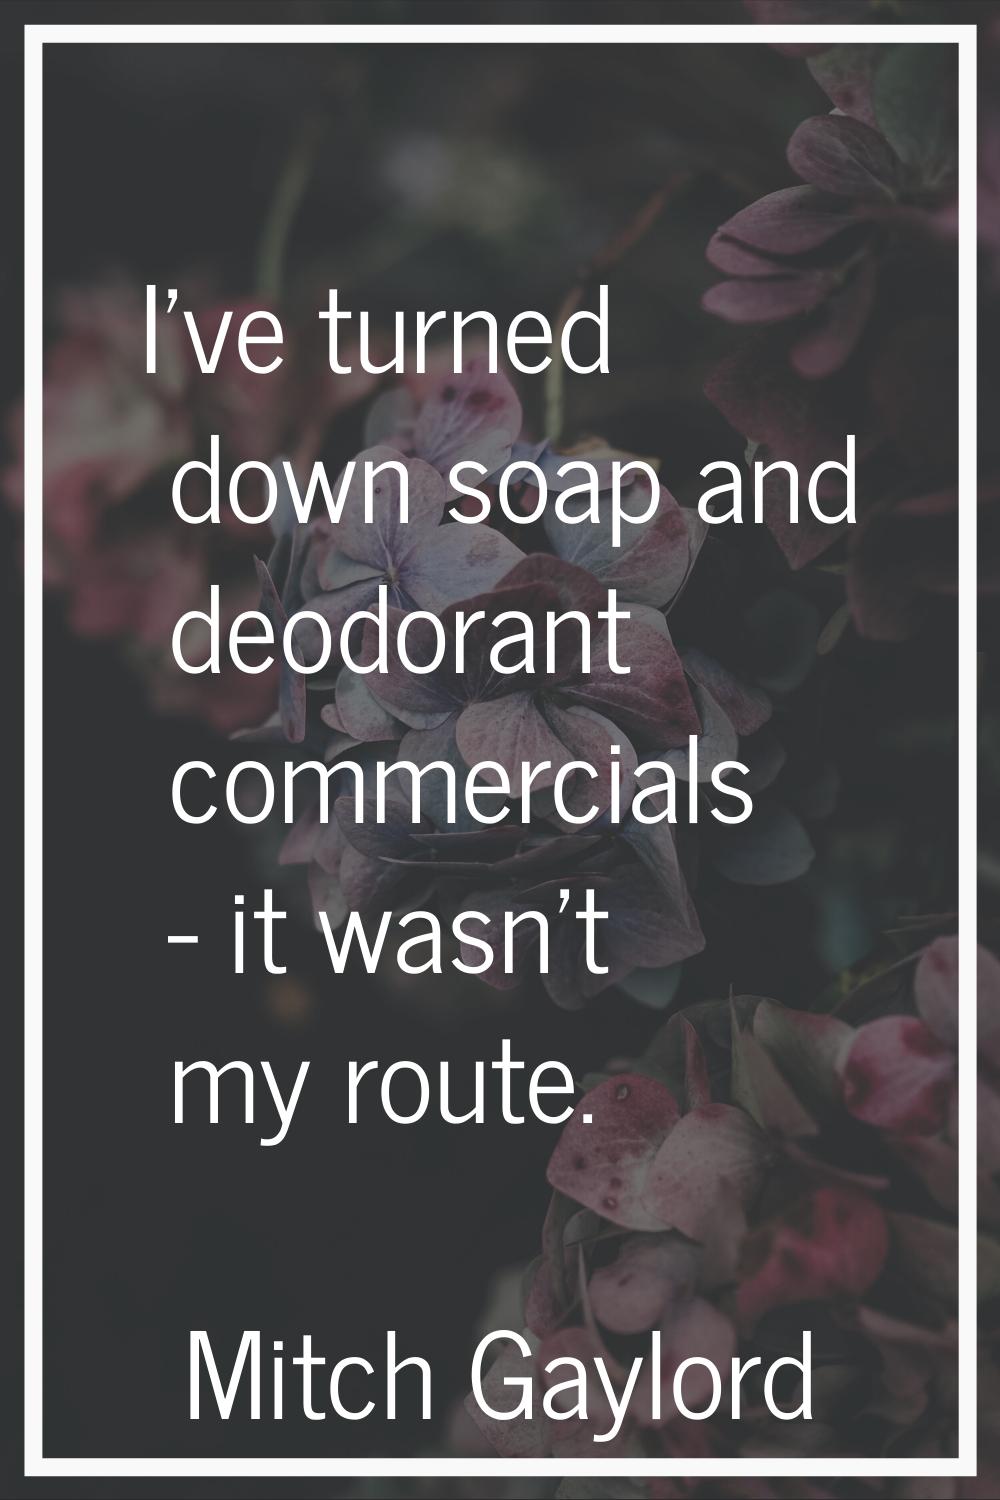 I've turned down soap and deodorant commercials - it wasn't my route.